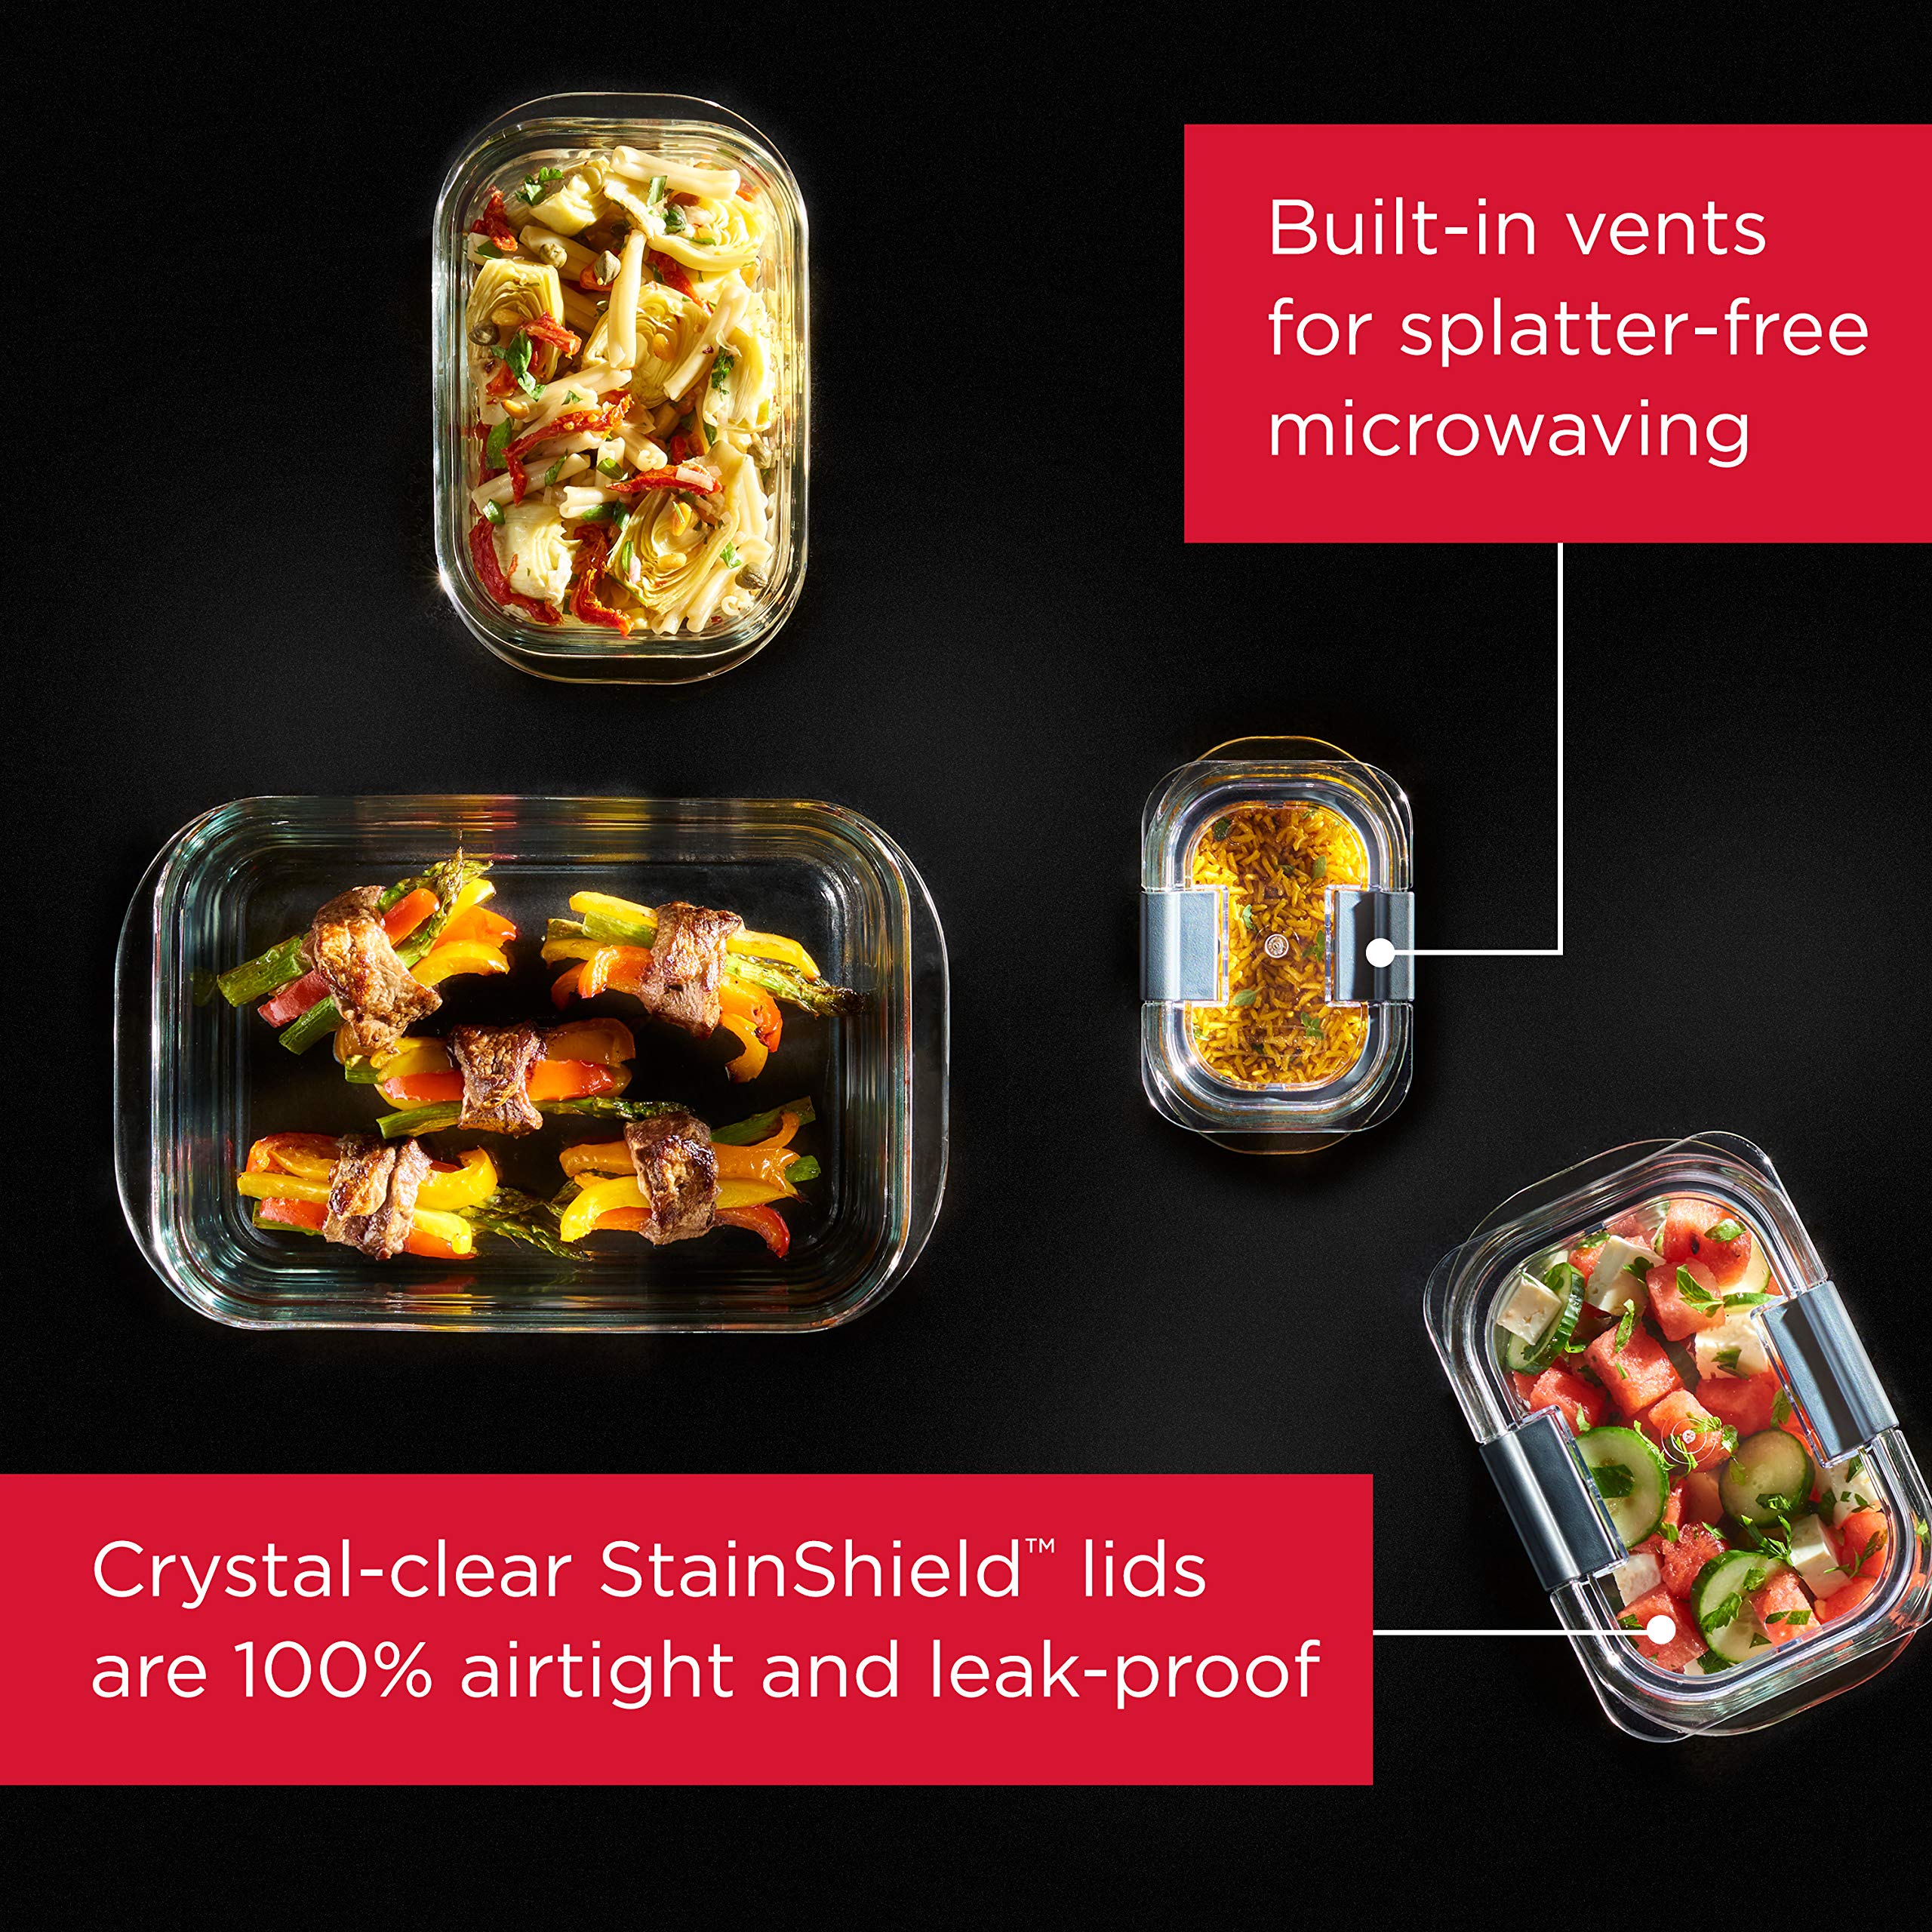 Rubbermaid 44-Piece Brilliance Food Storage Containers, Clear/Grey & Brilliance Glass Storage Set of 9 Food Containers with Lids (18 Pieces Total), Set, Assorted, Clear